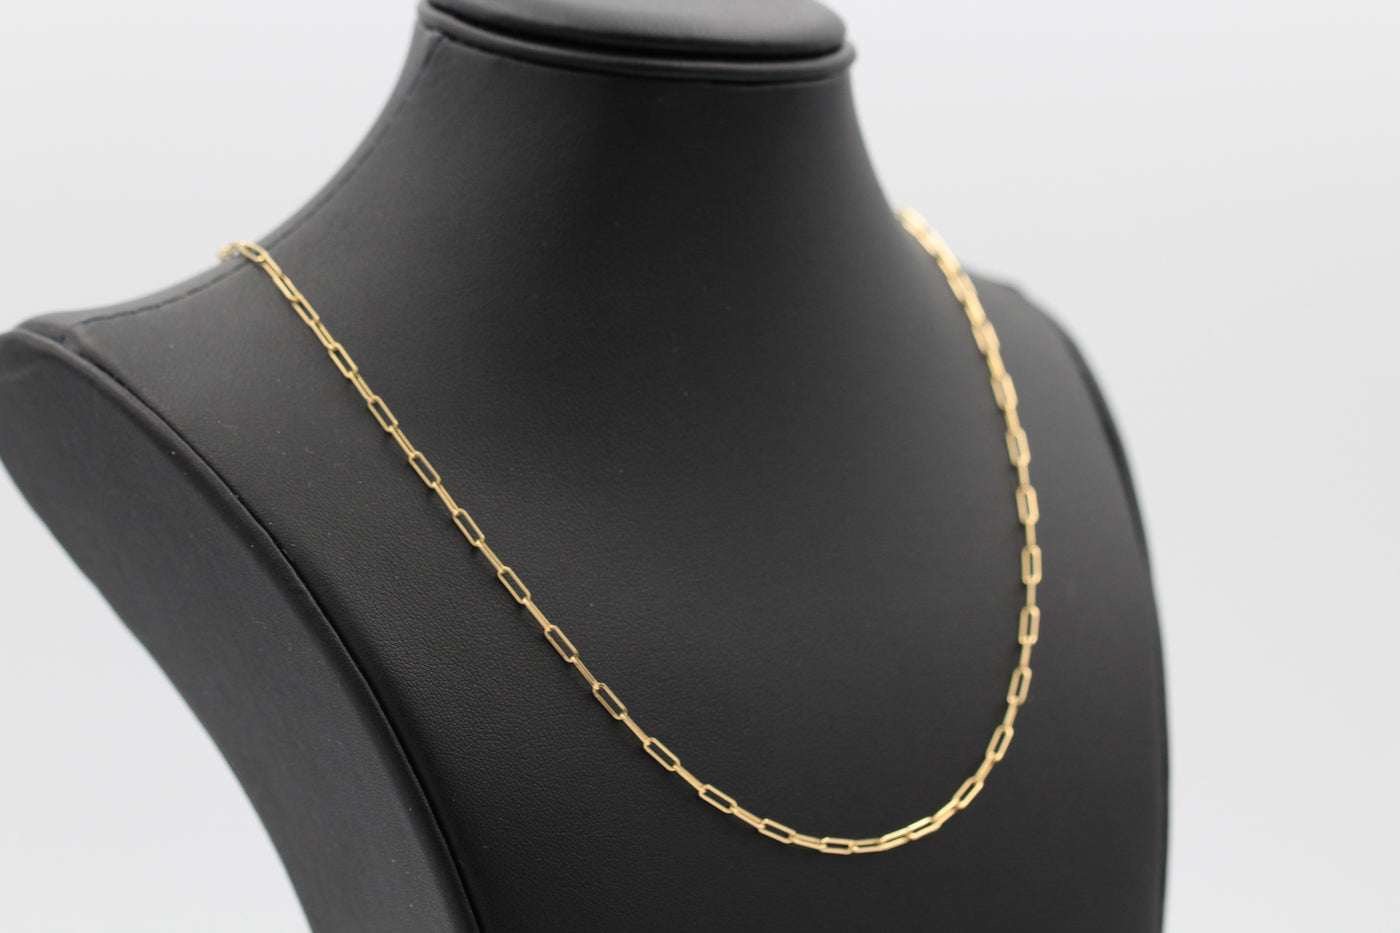 THIN PAPERCLIP CHAIN-17.5"